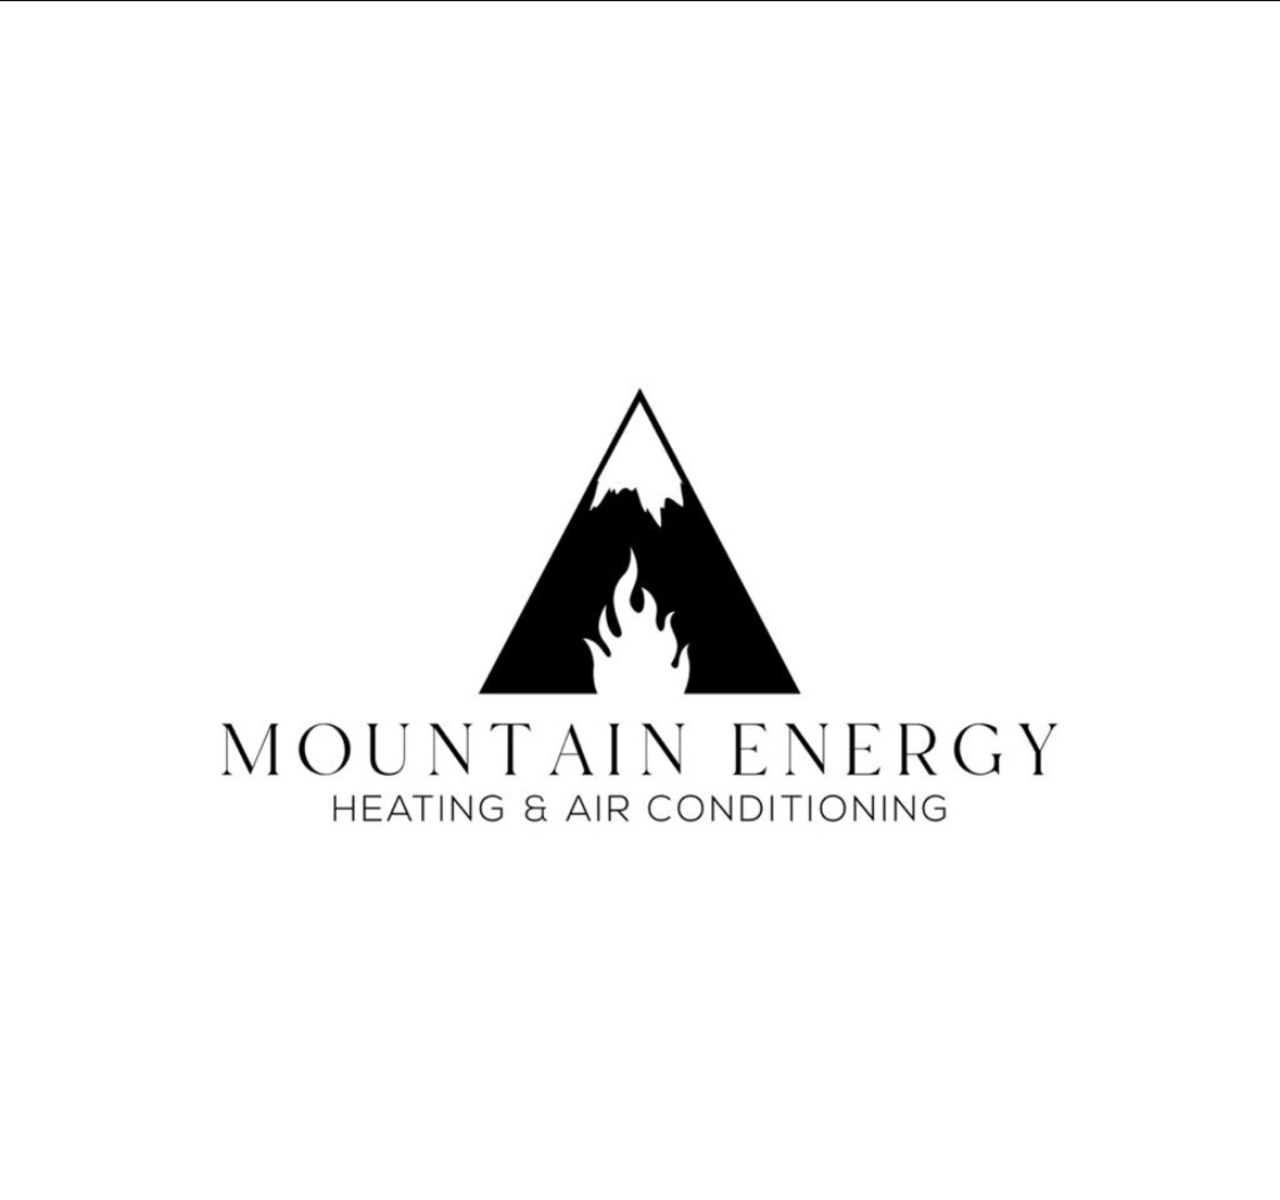 Mountain Energy Heating & Air Conditioning Inc's logo